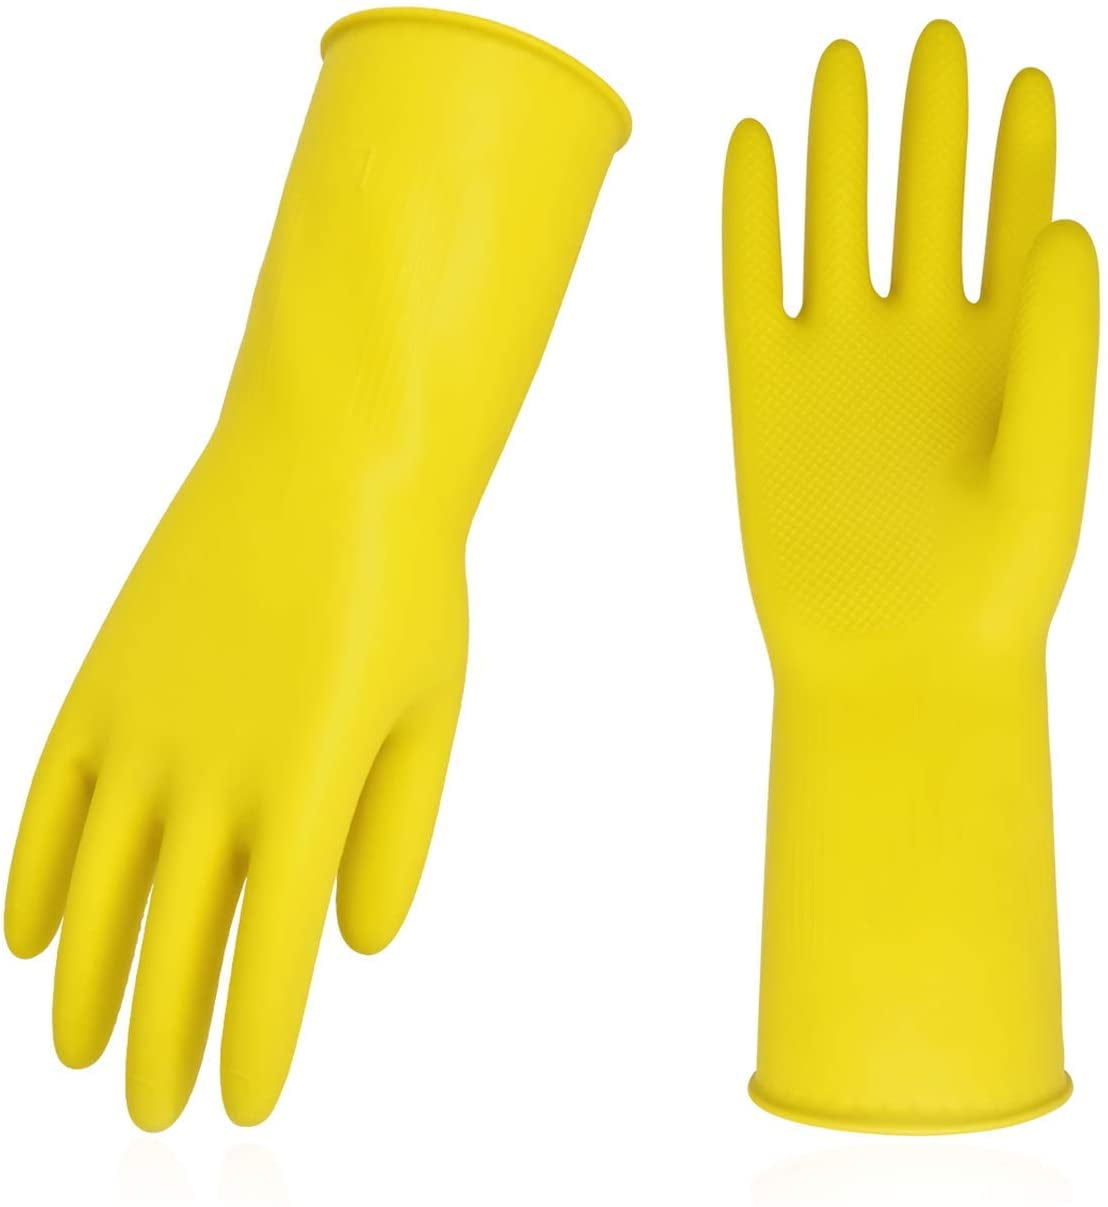 Rubber Latex Dish Washing Cleaning Long Gloves Household Kitchen Glove 